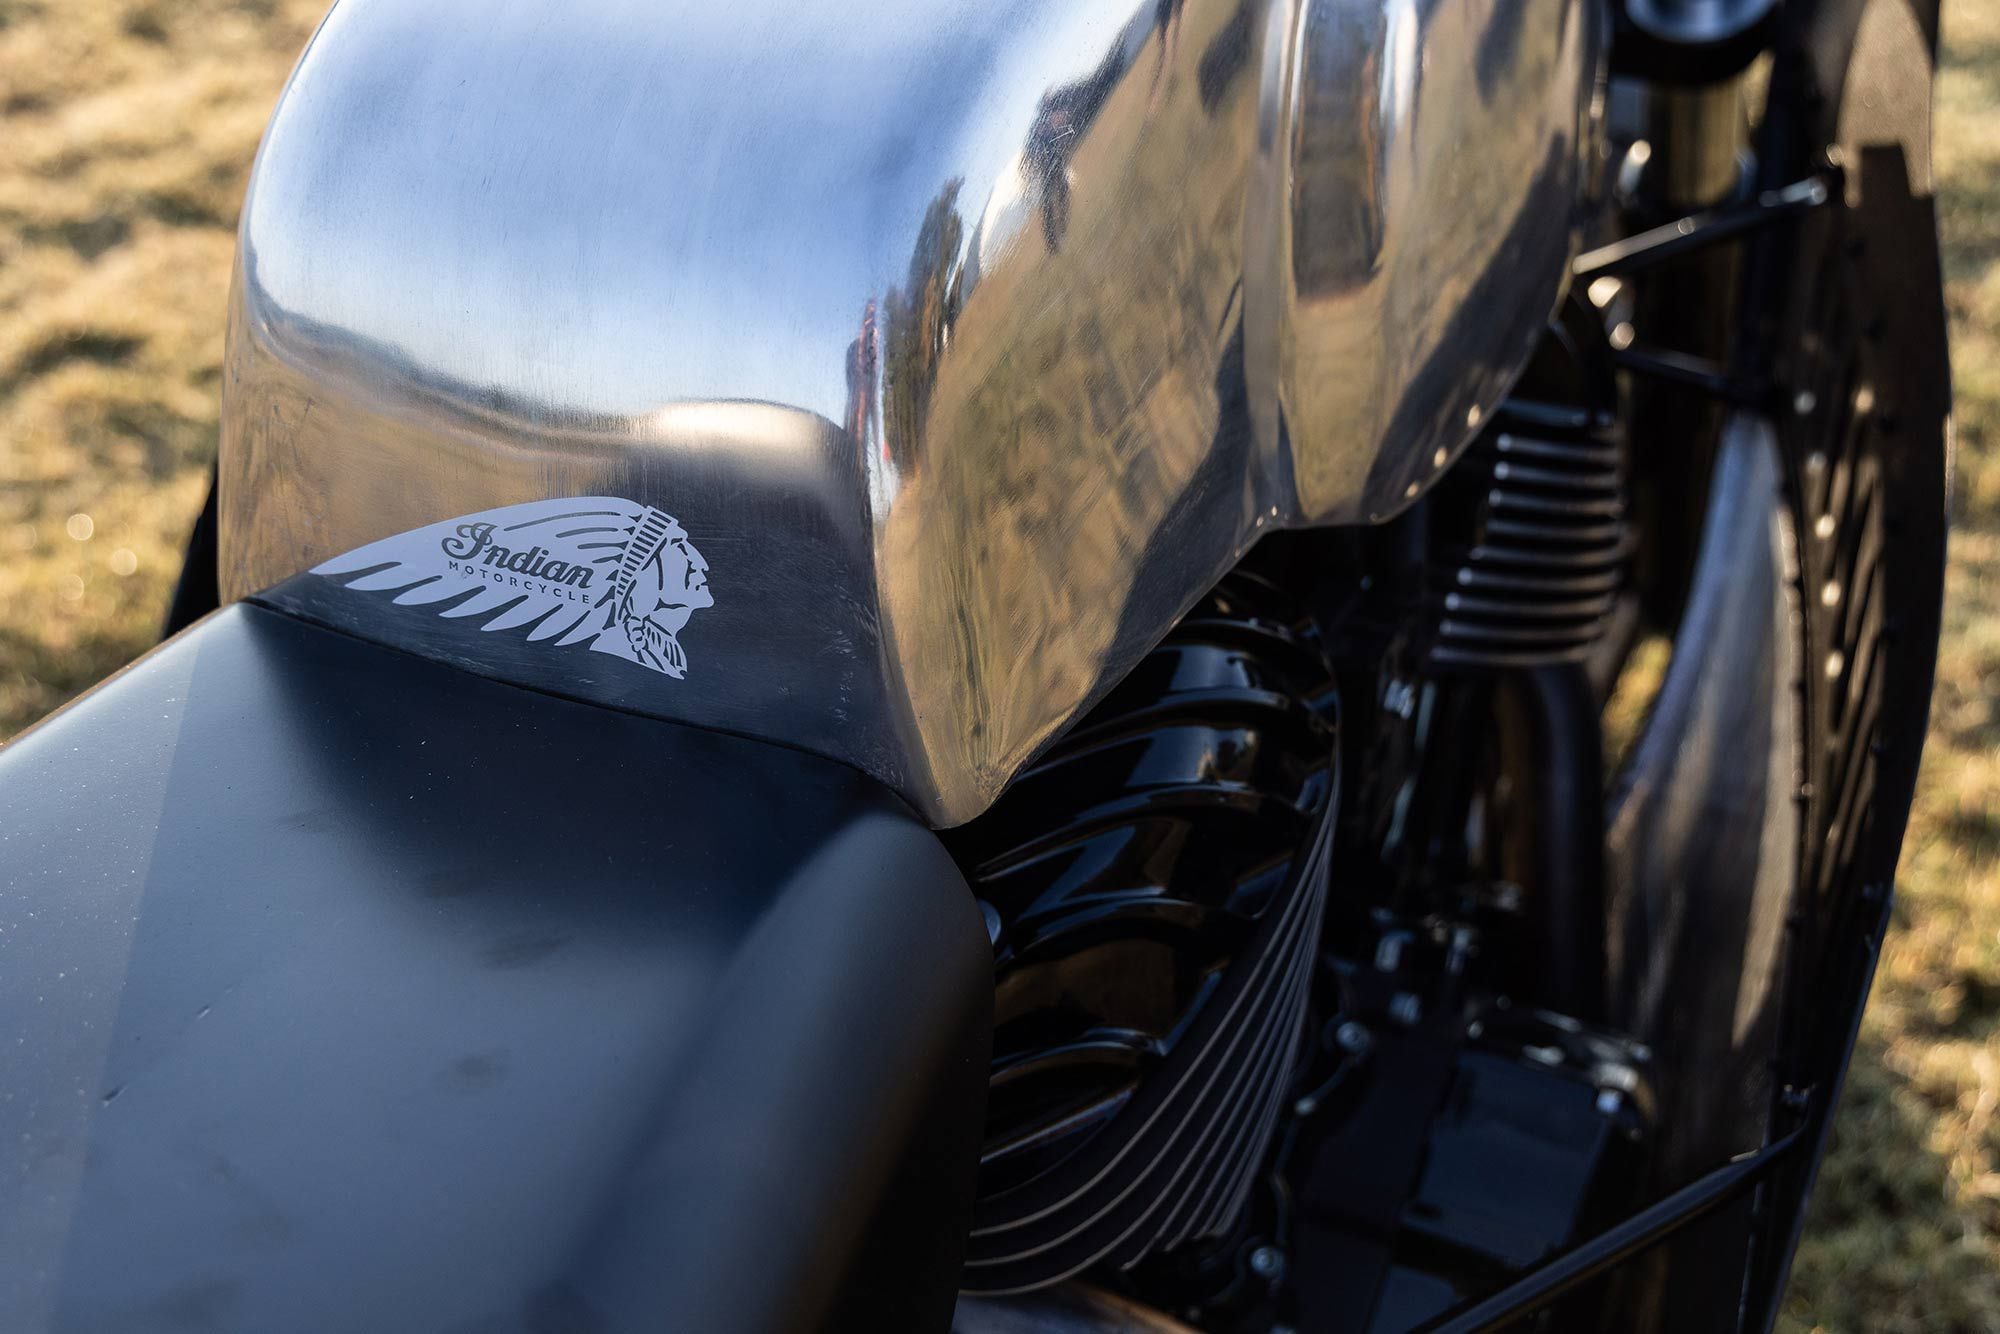 Header logo on custom tank made by Indian Motorcycle's Hindes.